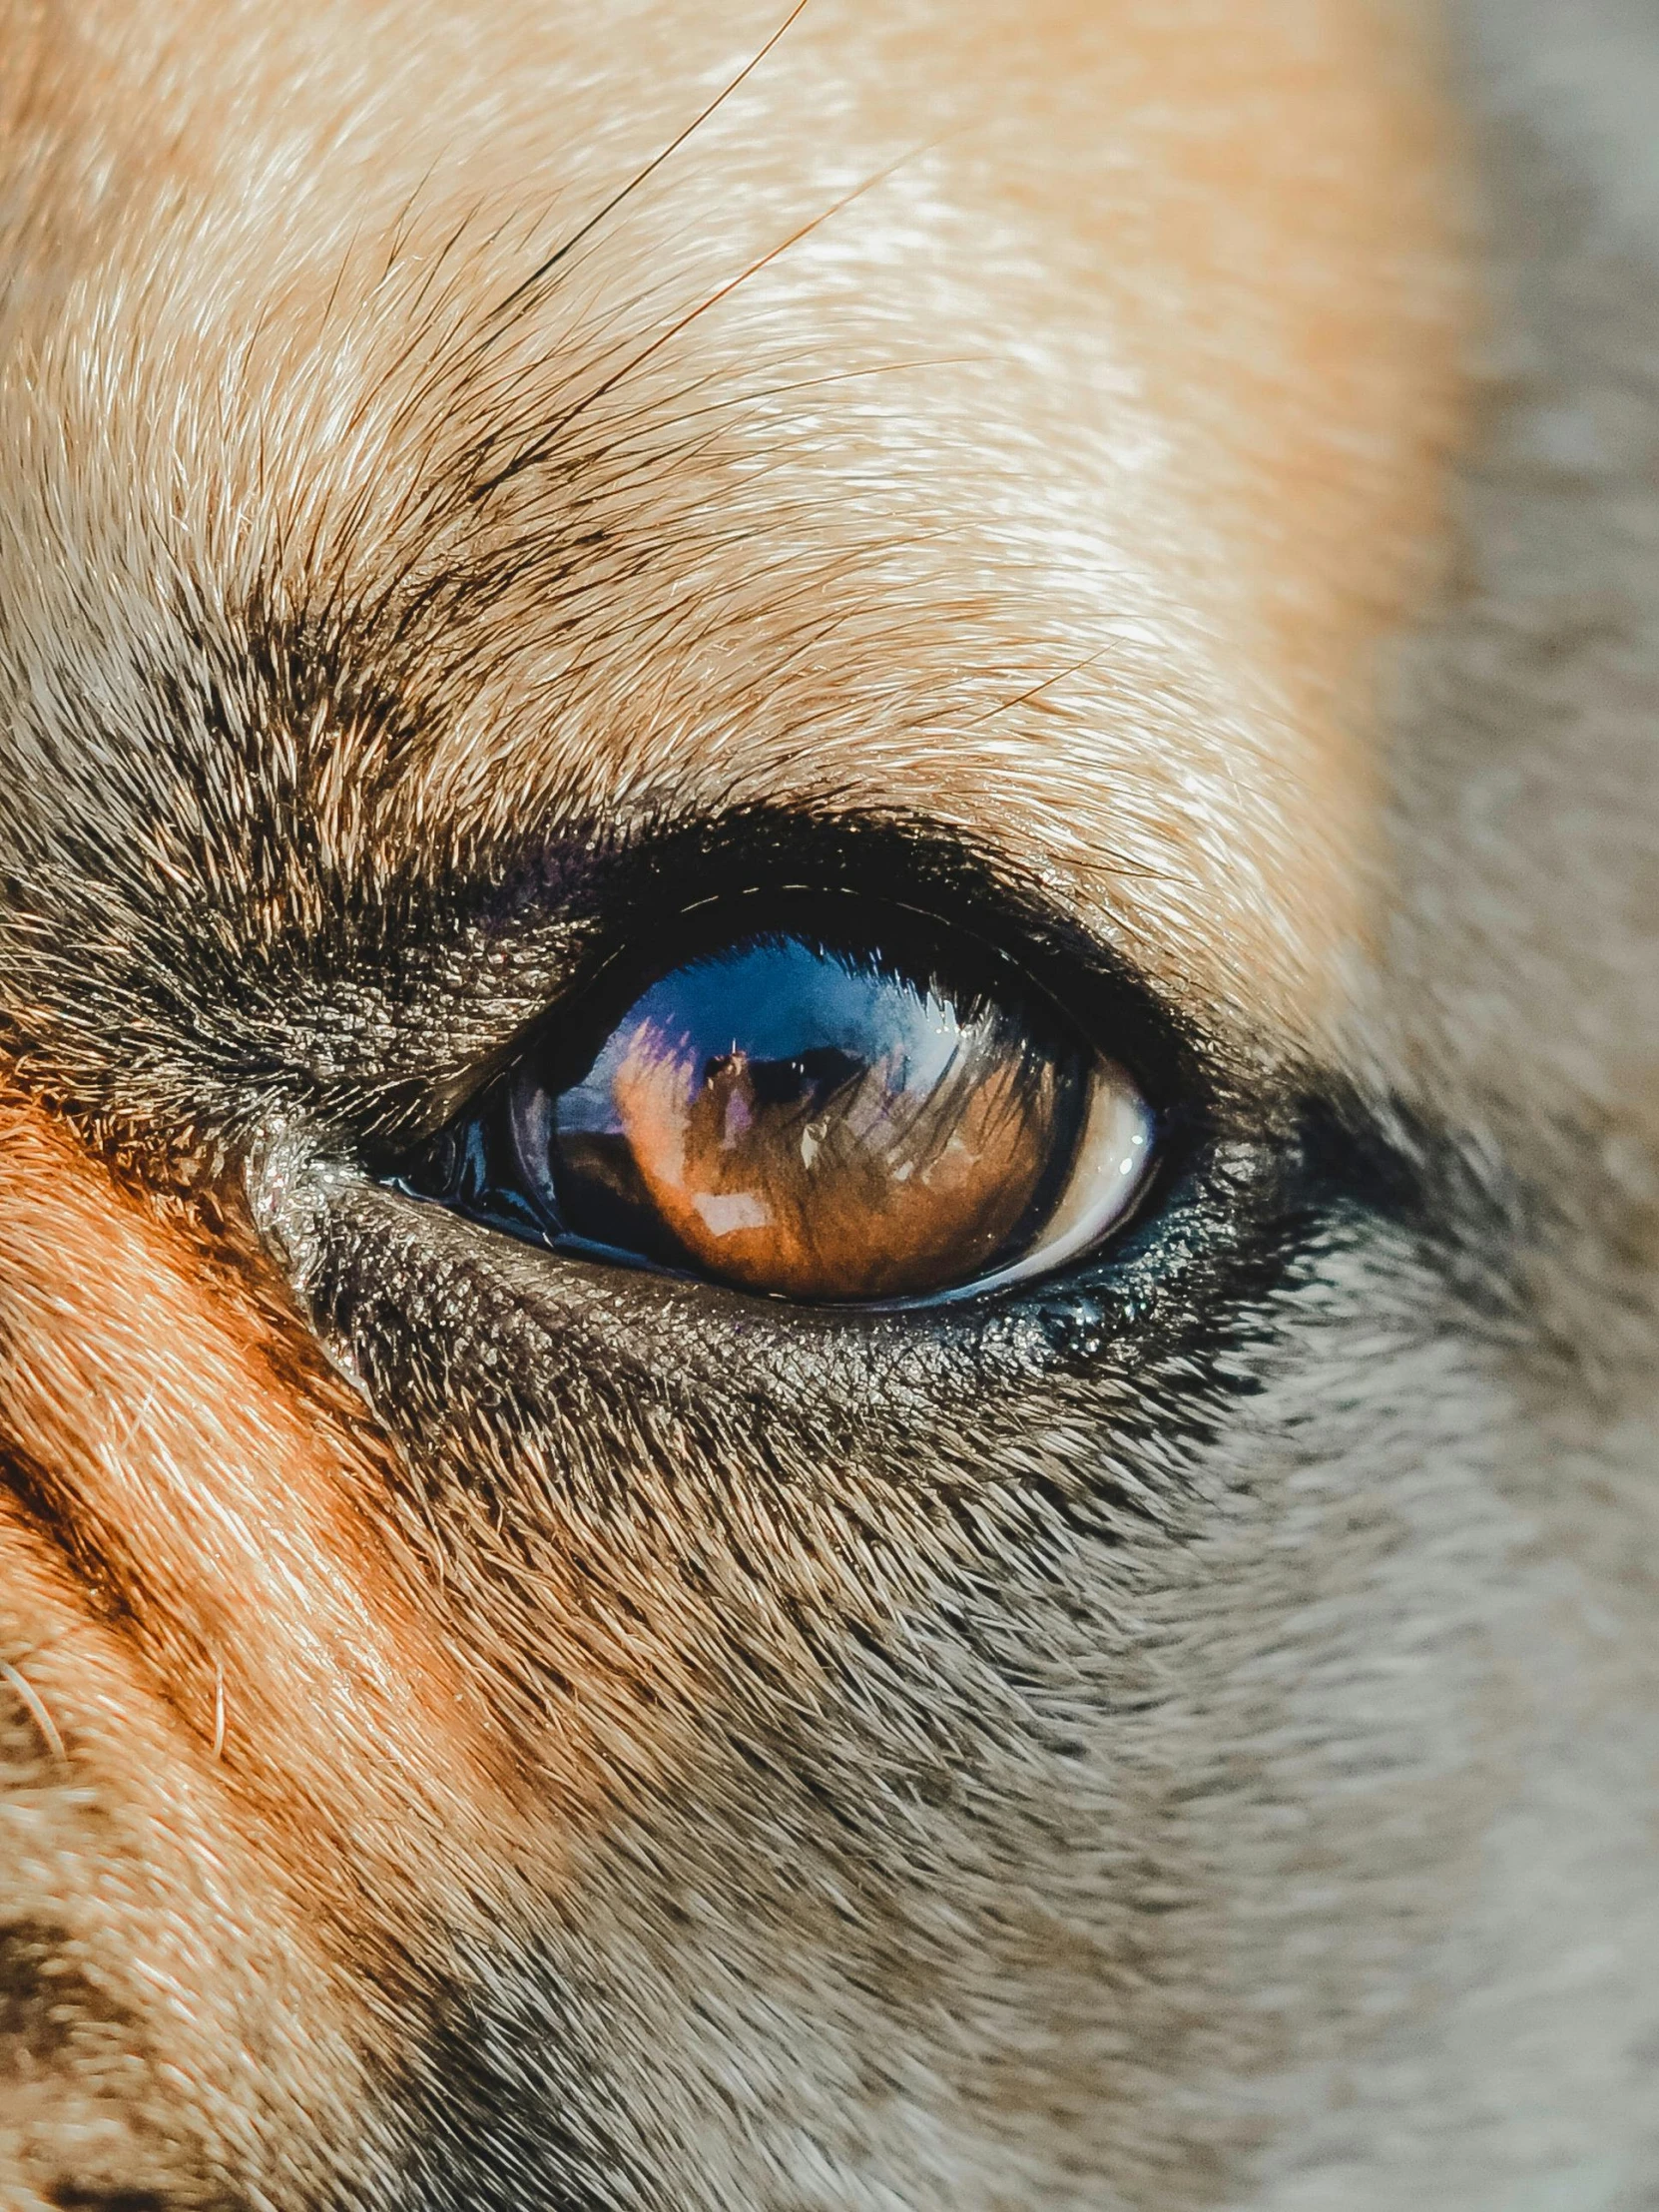 a close up view of an animal's eye